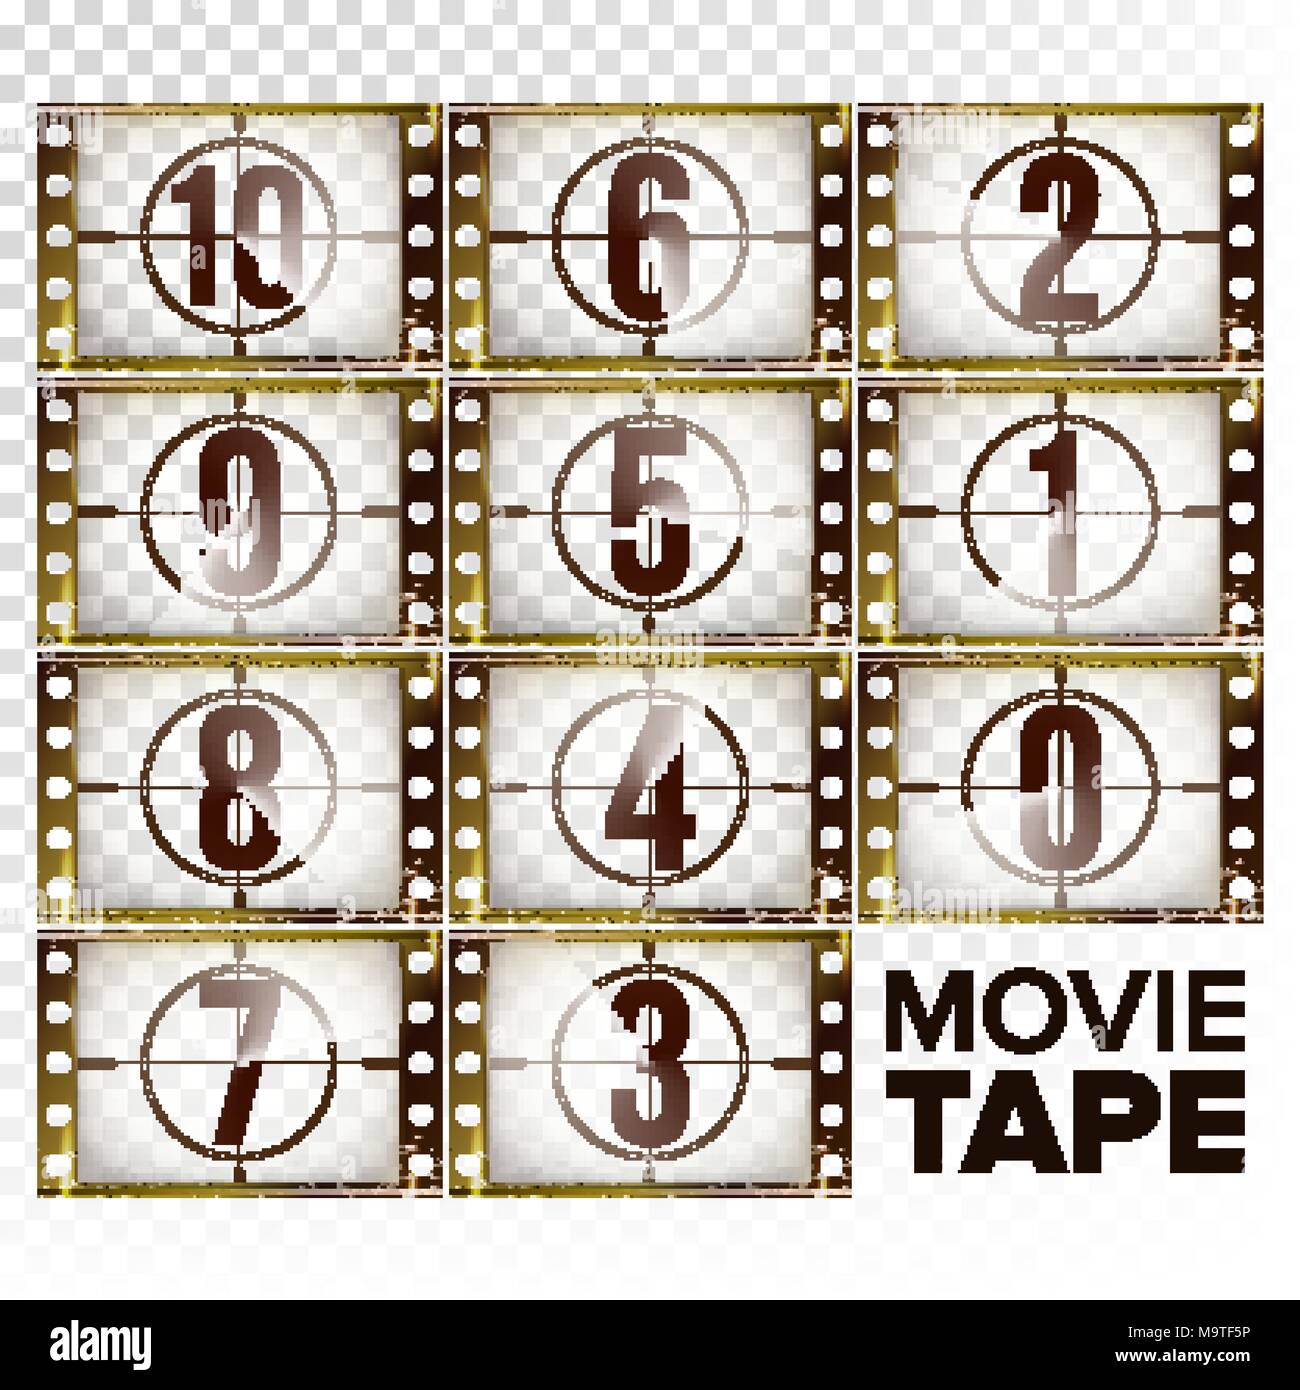 Film Countdown Numbers 10 - 0 Vector. Monochrome Brown Grunge Film Strip. Elements Of Cinema. Start Of The Retro Film. Counting Down Timer Animation. Isolated On Transparent Background Illustration Stock Vector